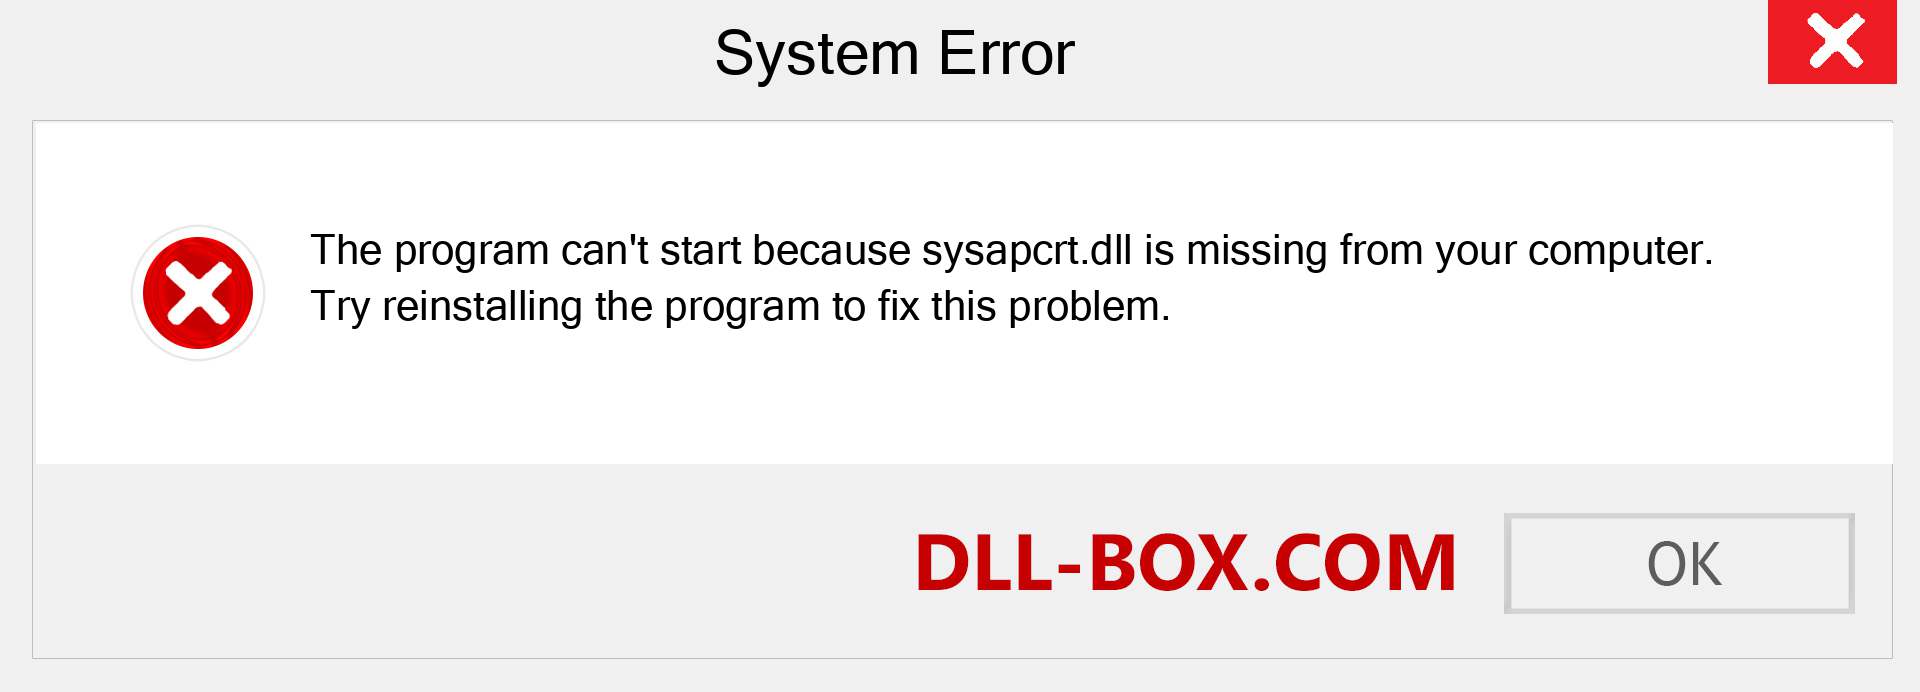  sysapcrt.dll file is missing?. Download for Windows 7, 8, 10 - Fix  sysapcrt dll Missing Error on Windows, photos, images